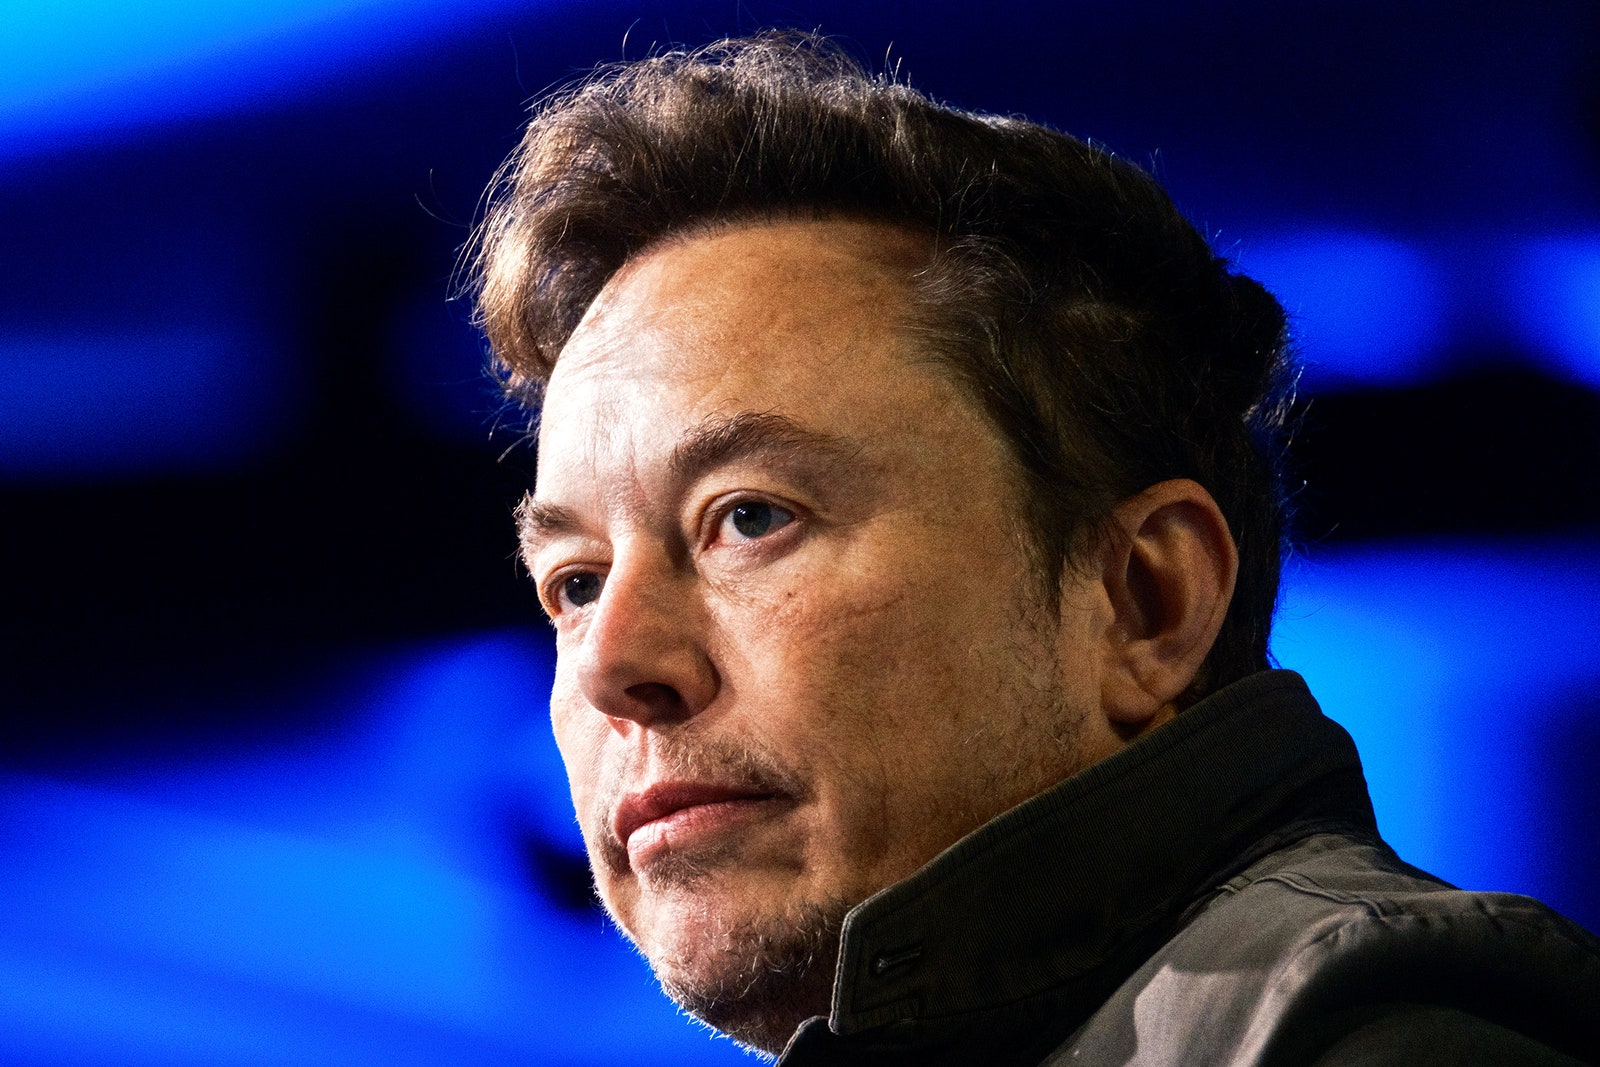 By Seizing @Music, Elon Musk Shows He Doesn’t Know What Made Twitter Good